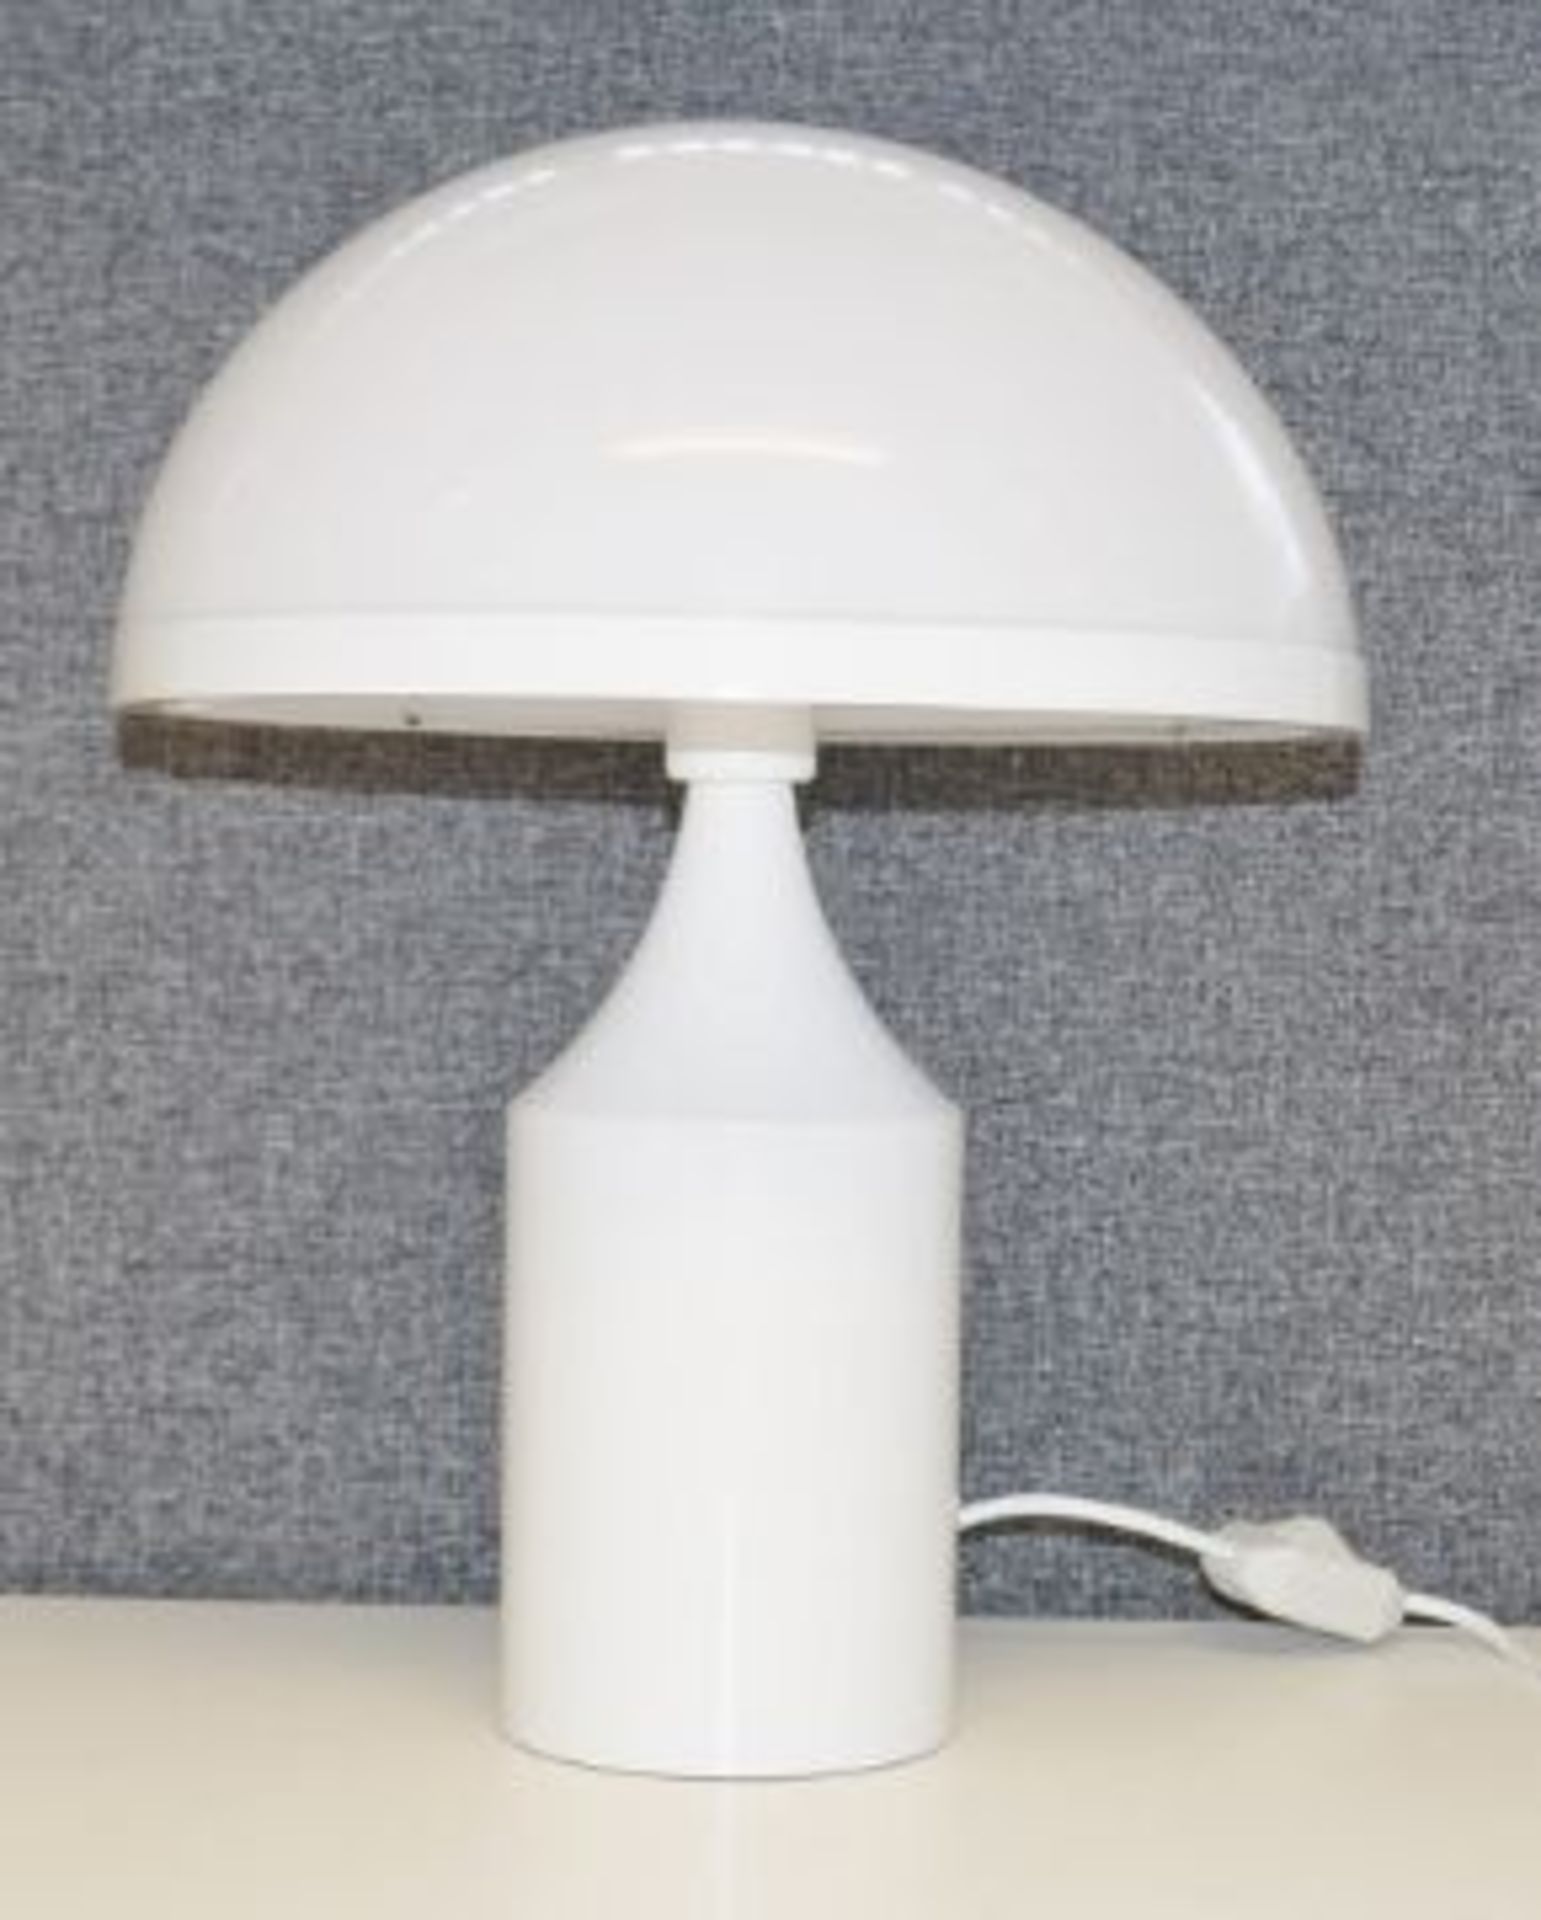 1 x CHELSOM Luxury Mushroom-Shaped Desk Lamp With A Ceramic Base And Frosted Half-Globe Acrylic - Image 2 of 11